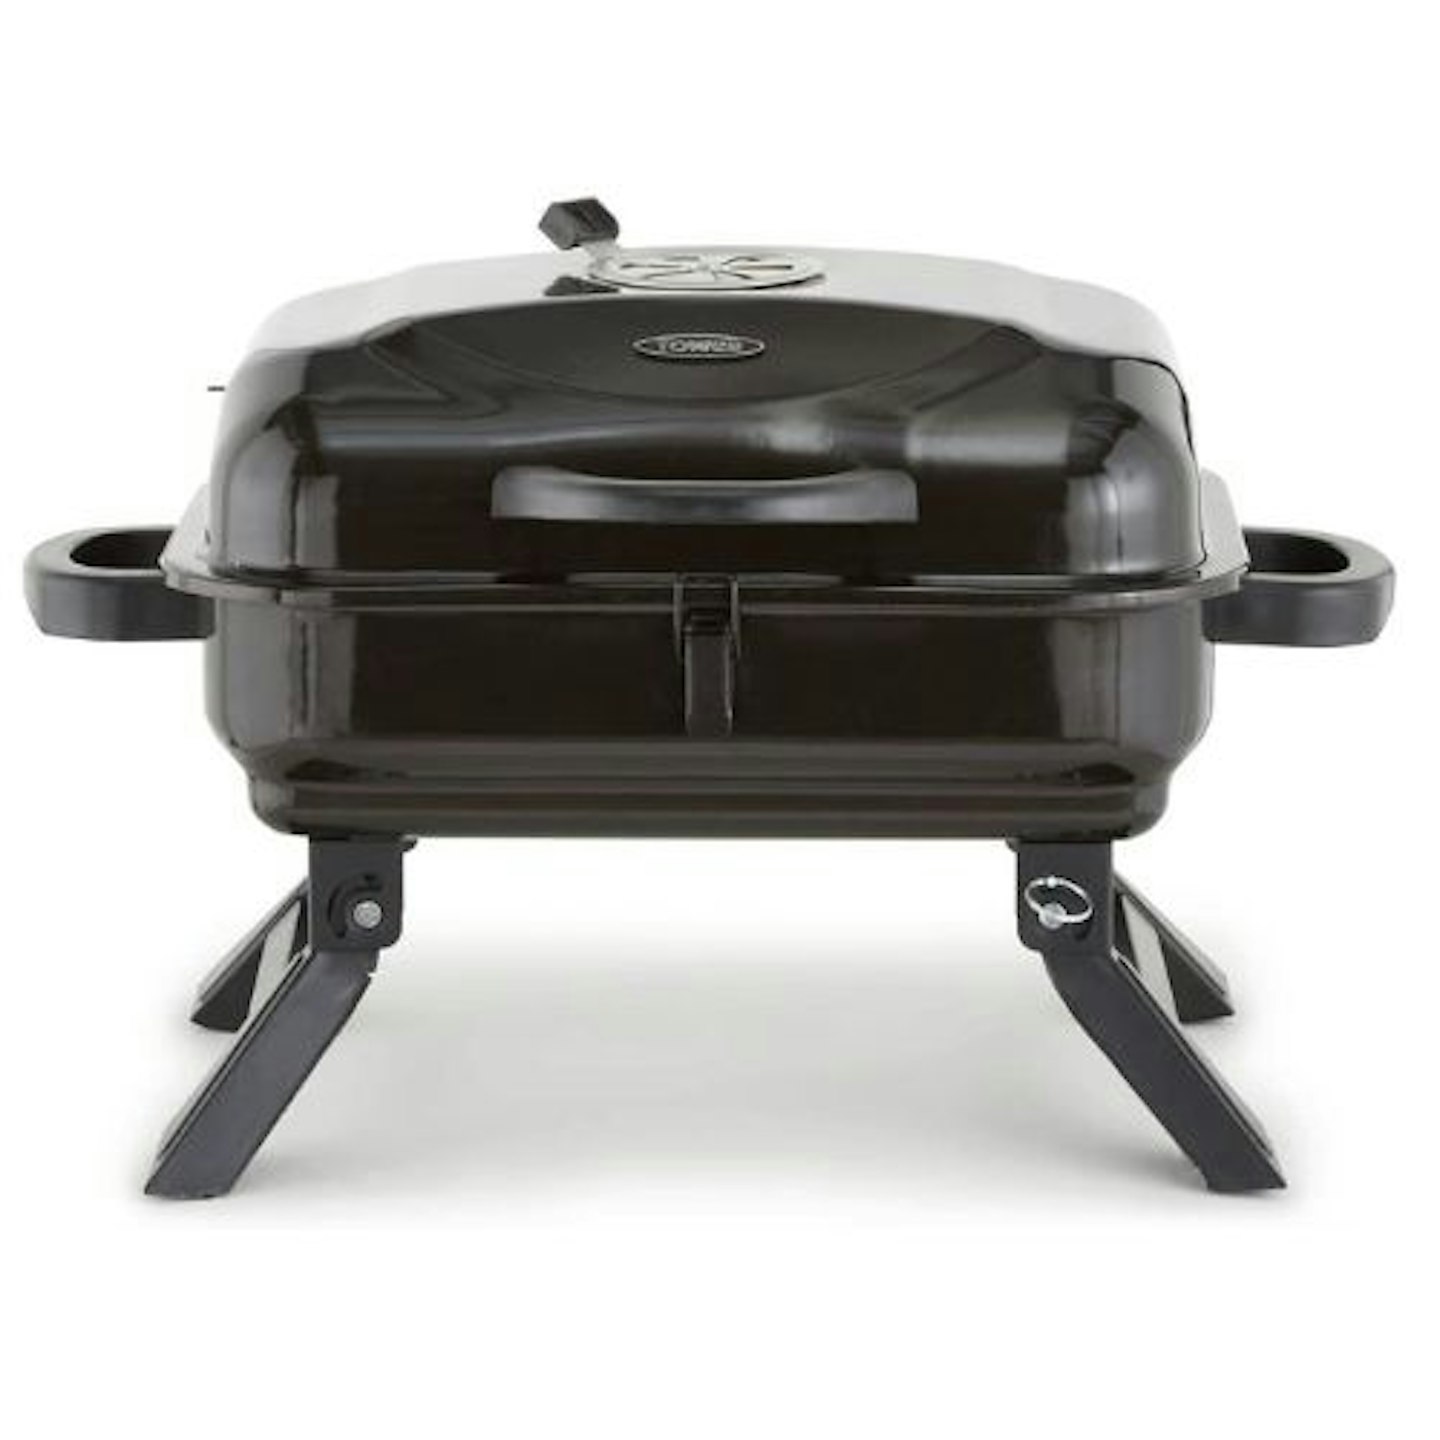 Tower T978539 Compact Charcoal Grill